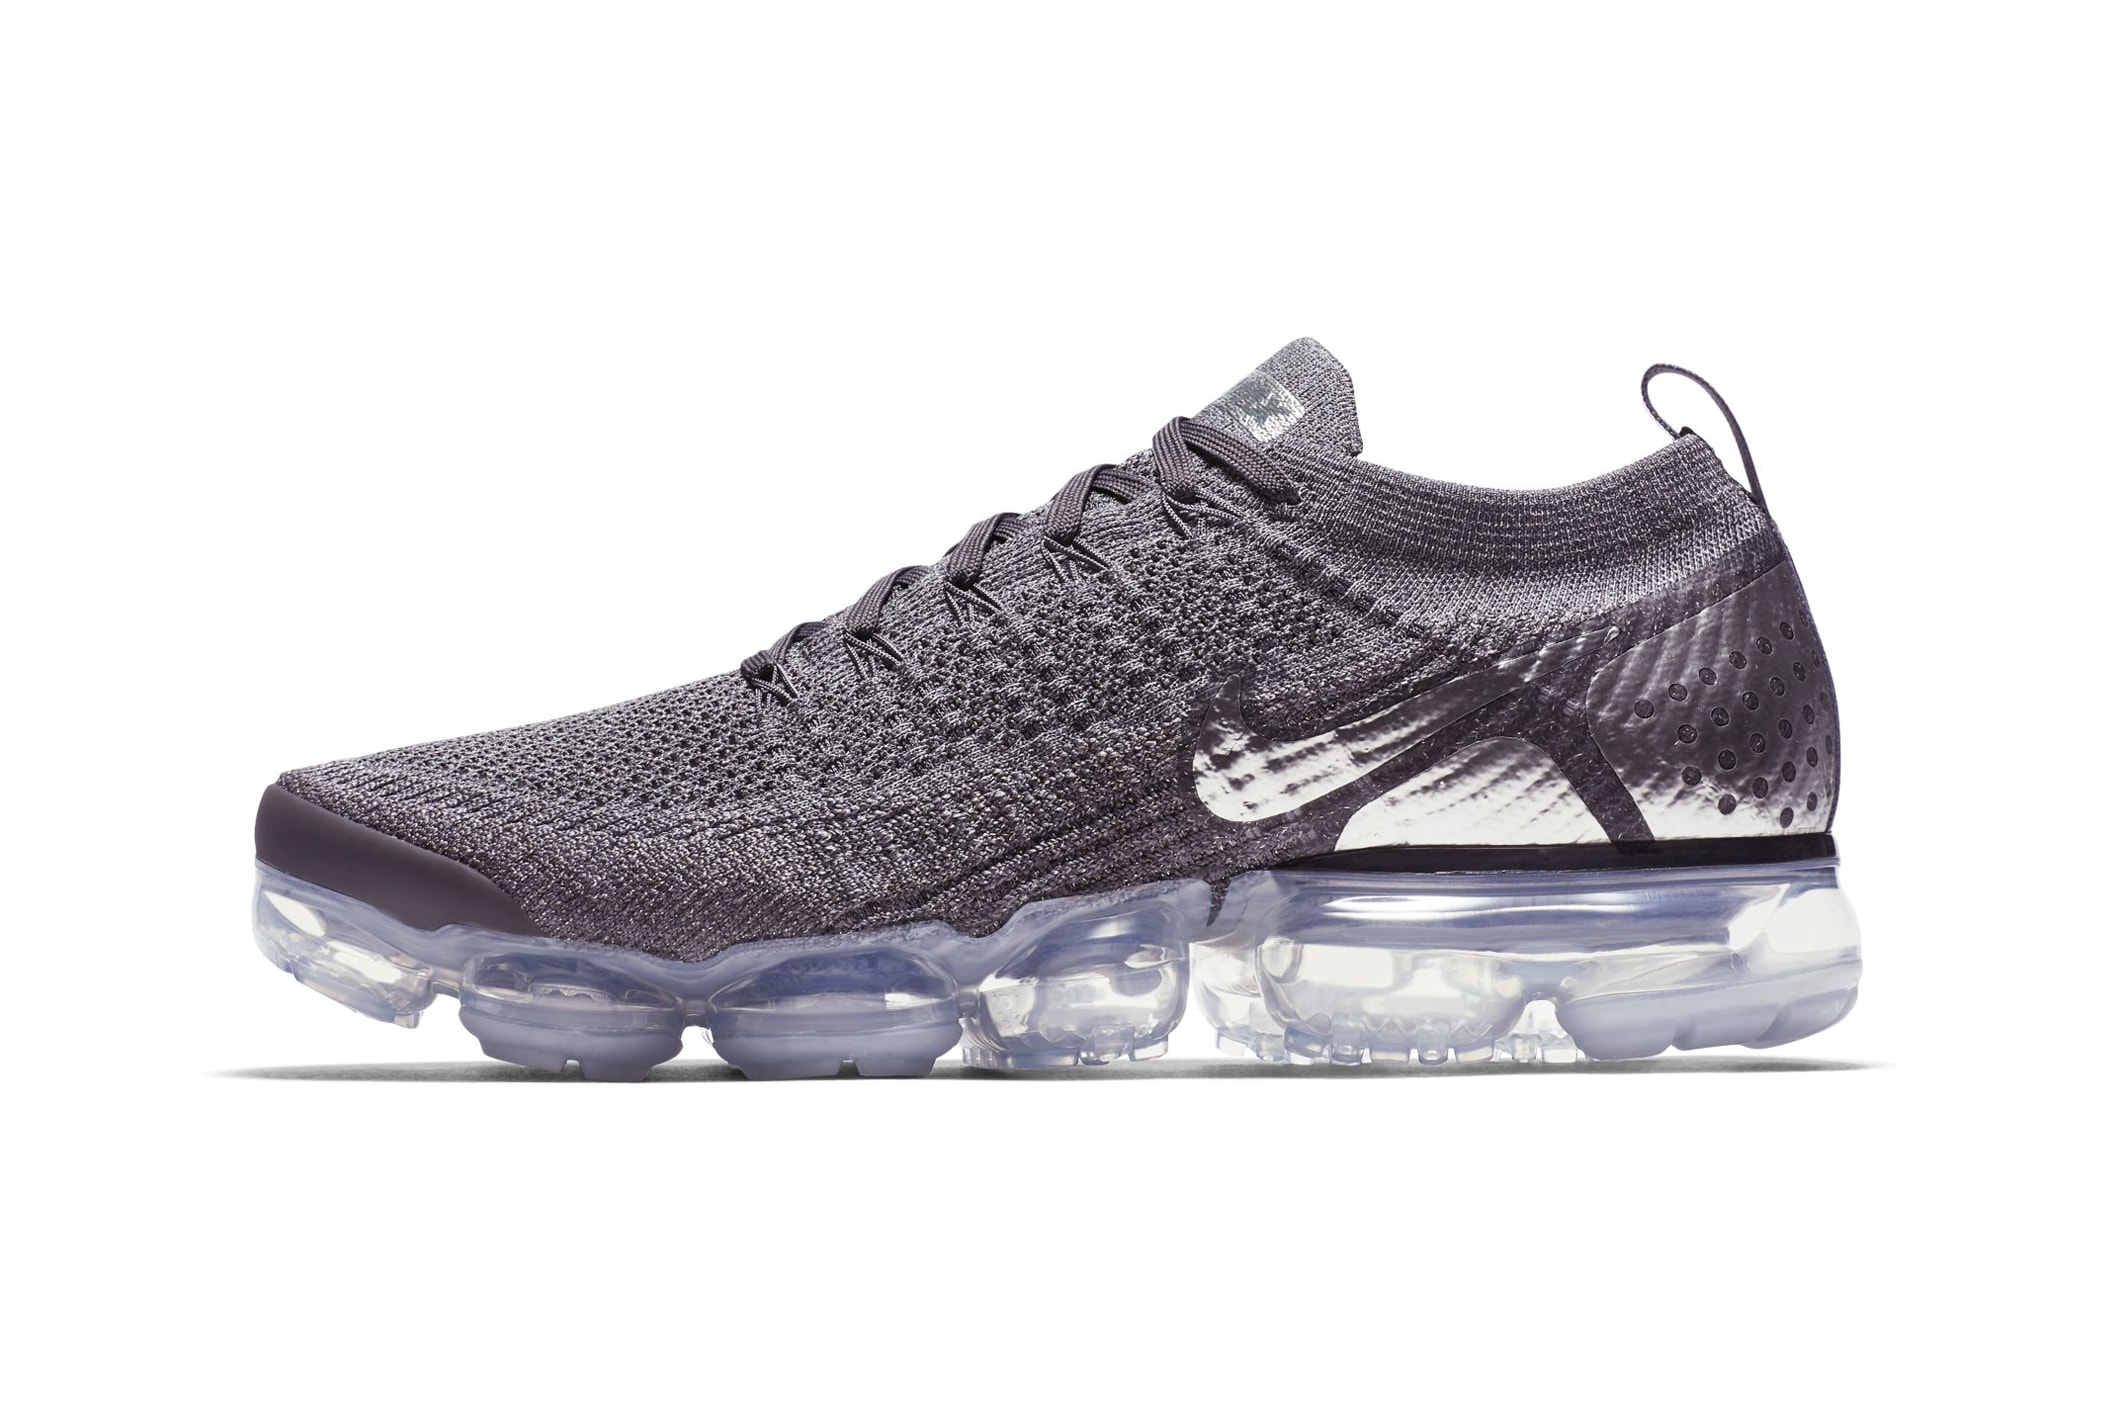 Nike Air VaporMax Flyknit 2.0 "Chrome" release date info price sneaker colorway purchase online